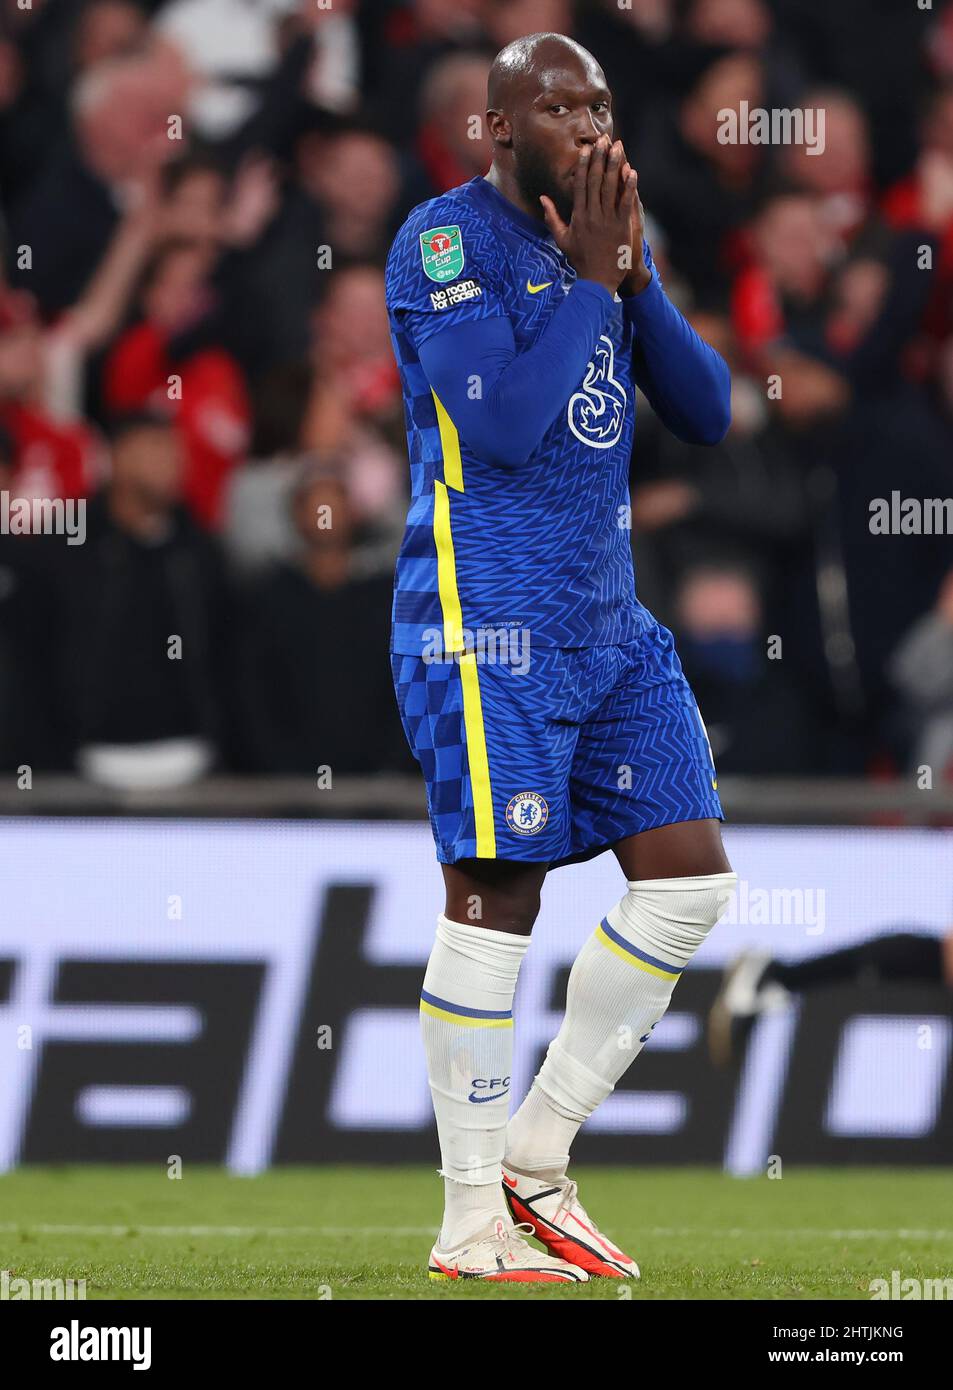 Romelu Lukaku of Chelsea - Chelsea v Liverpool, Carabao Cup Final, Wembley Stadium, London (Wembley) - 27th February 2022  Editorial Use Only - DataCo restrictions apply Stock Photo